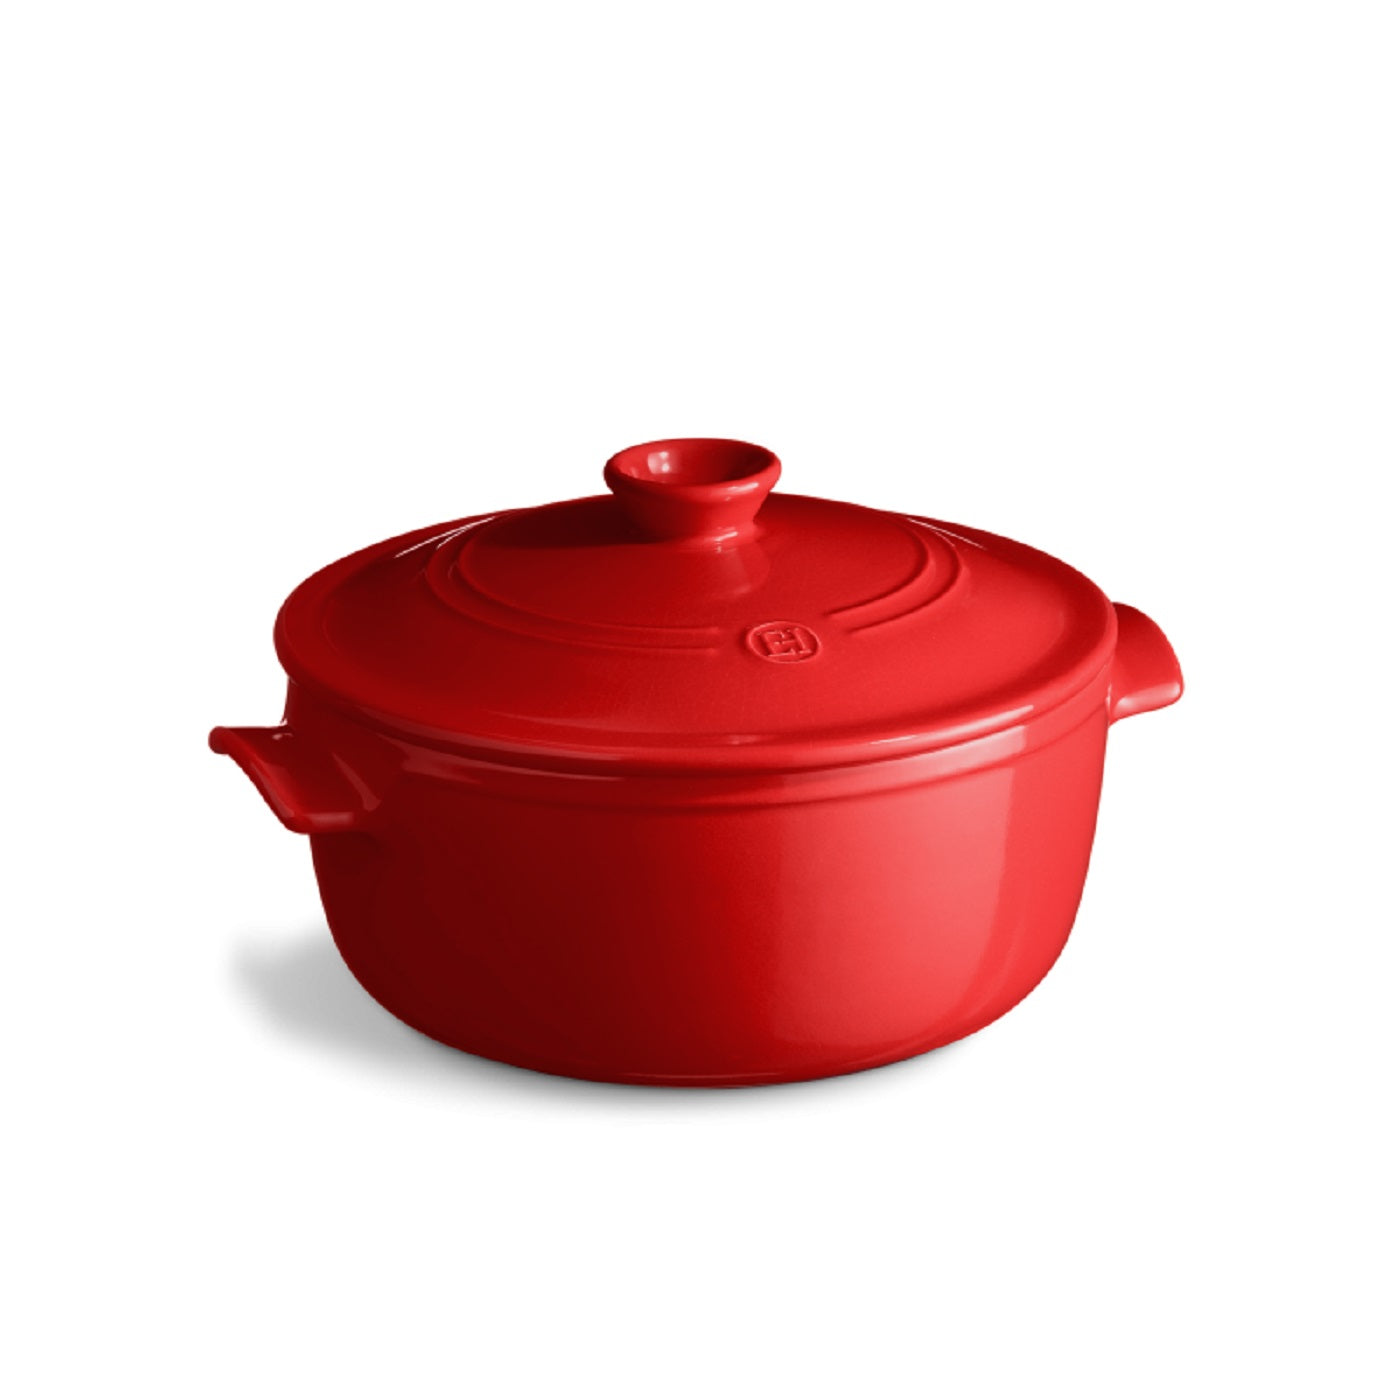 Emile Henry Round Cocotte 26 cm, Red